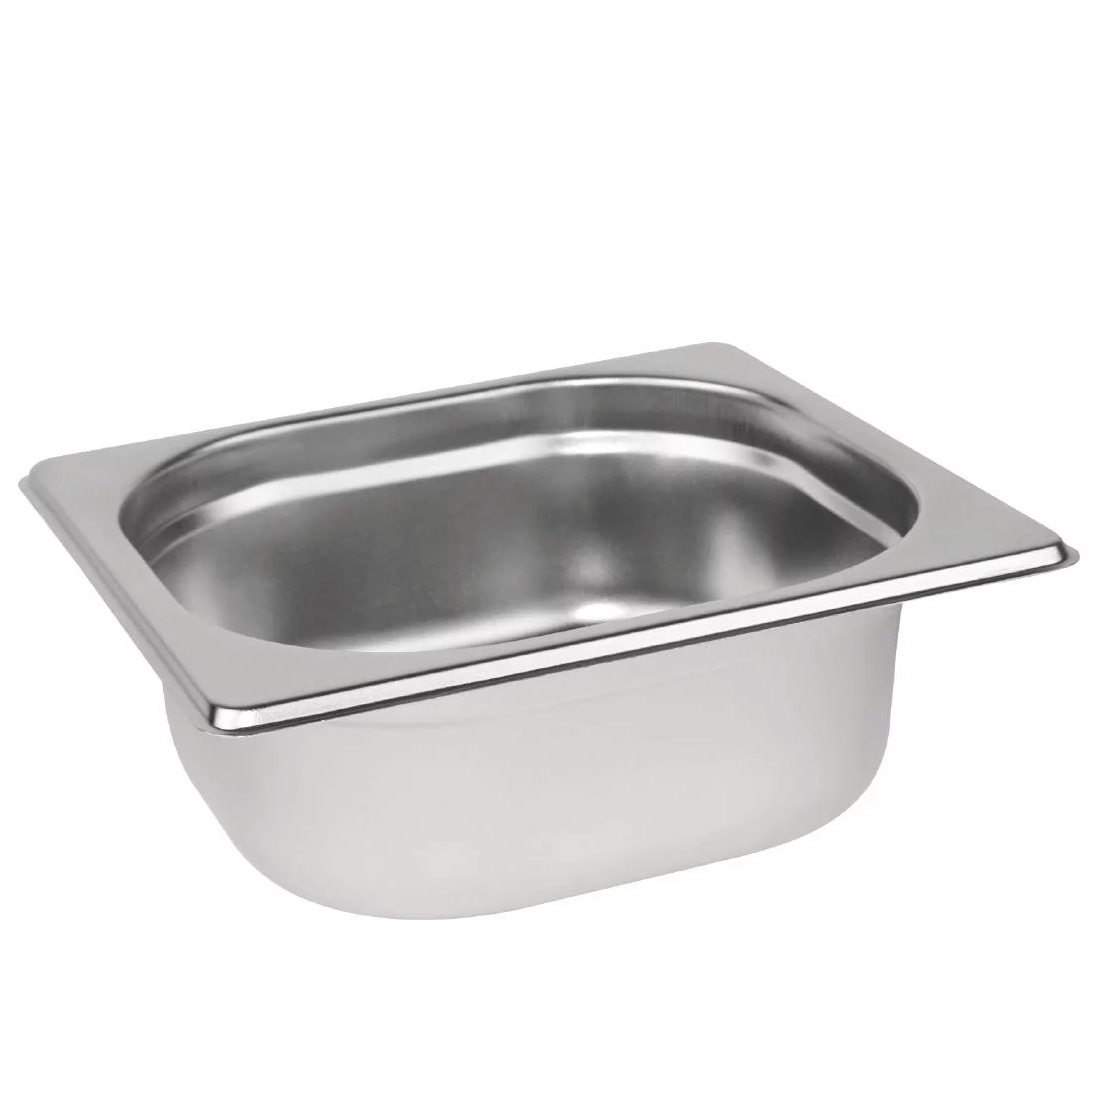  Ǔ Vogue Stainless Steel 1/6 Gastronorm Tray 65mm